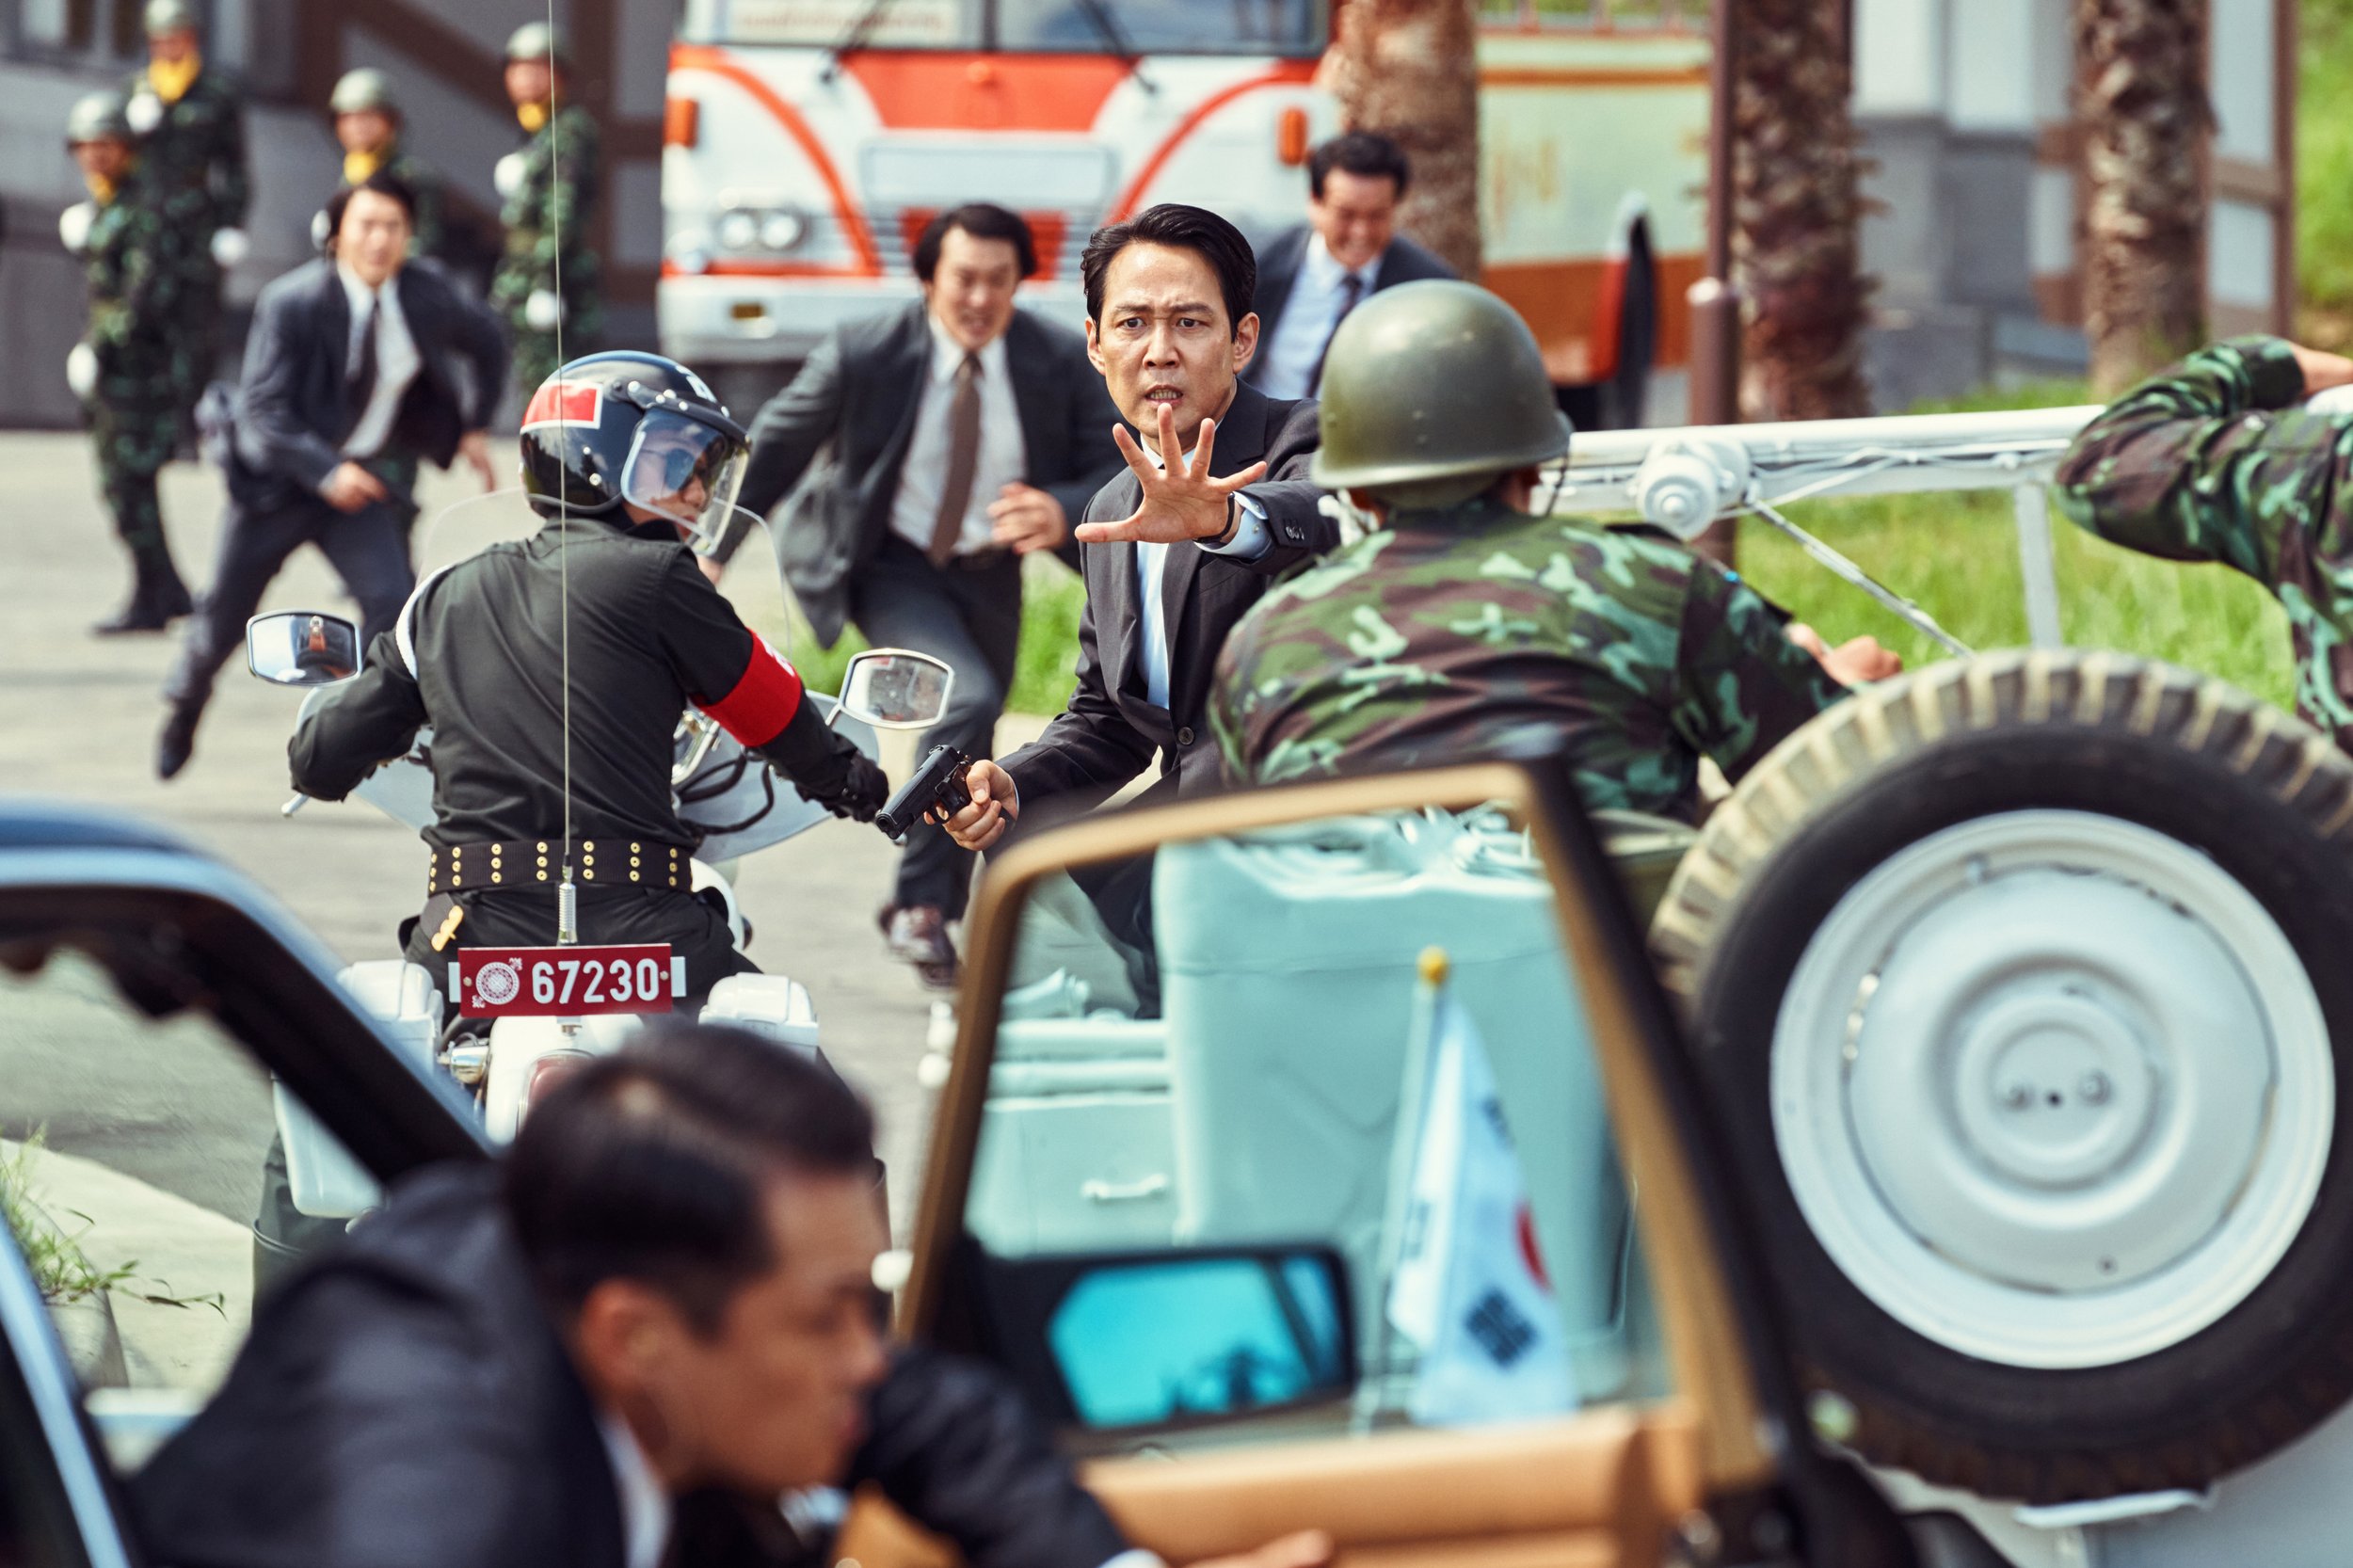 Jung Woo-sung stands in the middle of traffic chaos during an outdoor shootout in Hunt